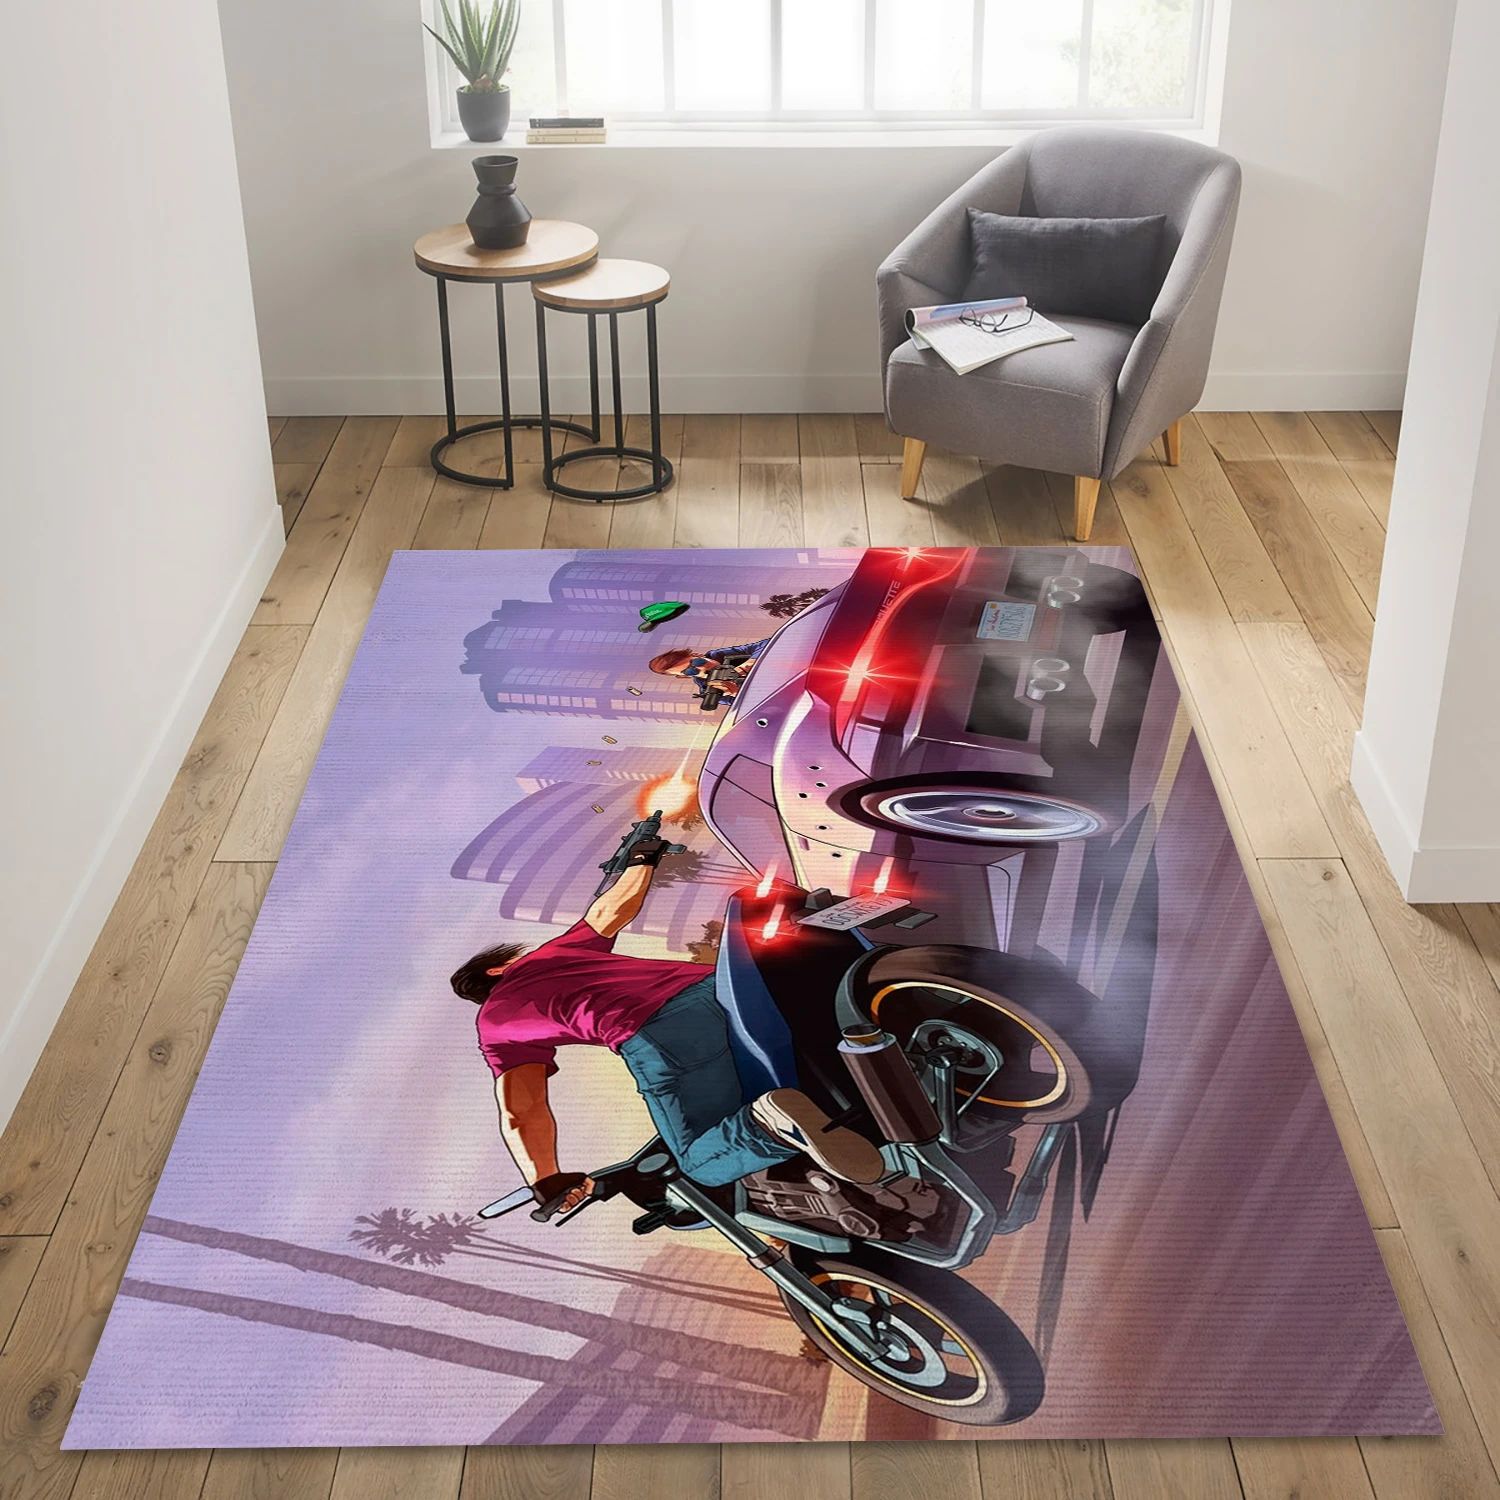 Grand Theft Auto V Video Game Reangle Rug, Area Rug - Home Decor Floor Decor - Indoor Outdoor Rugs